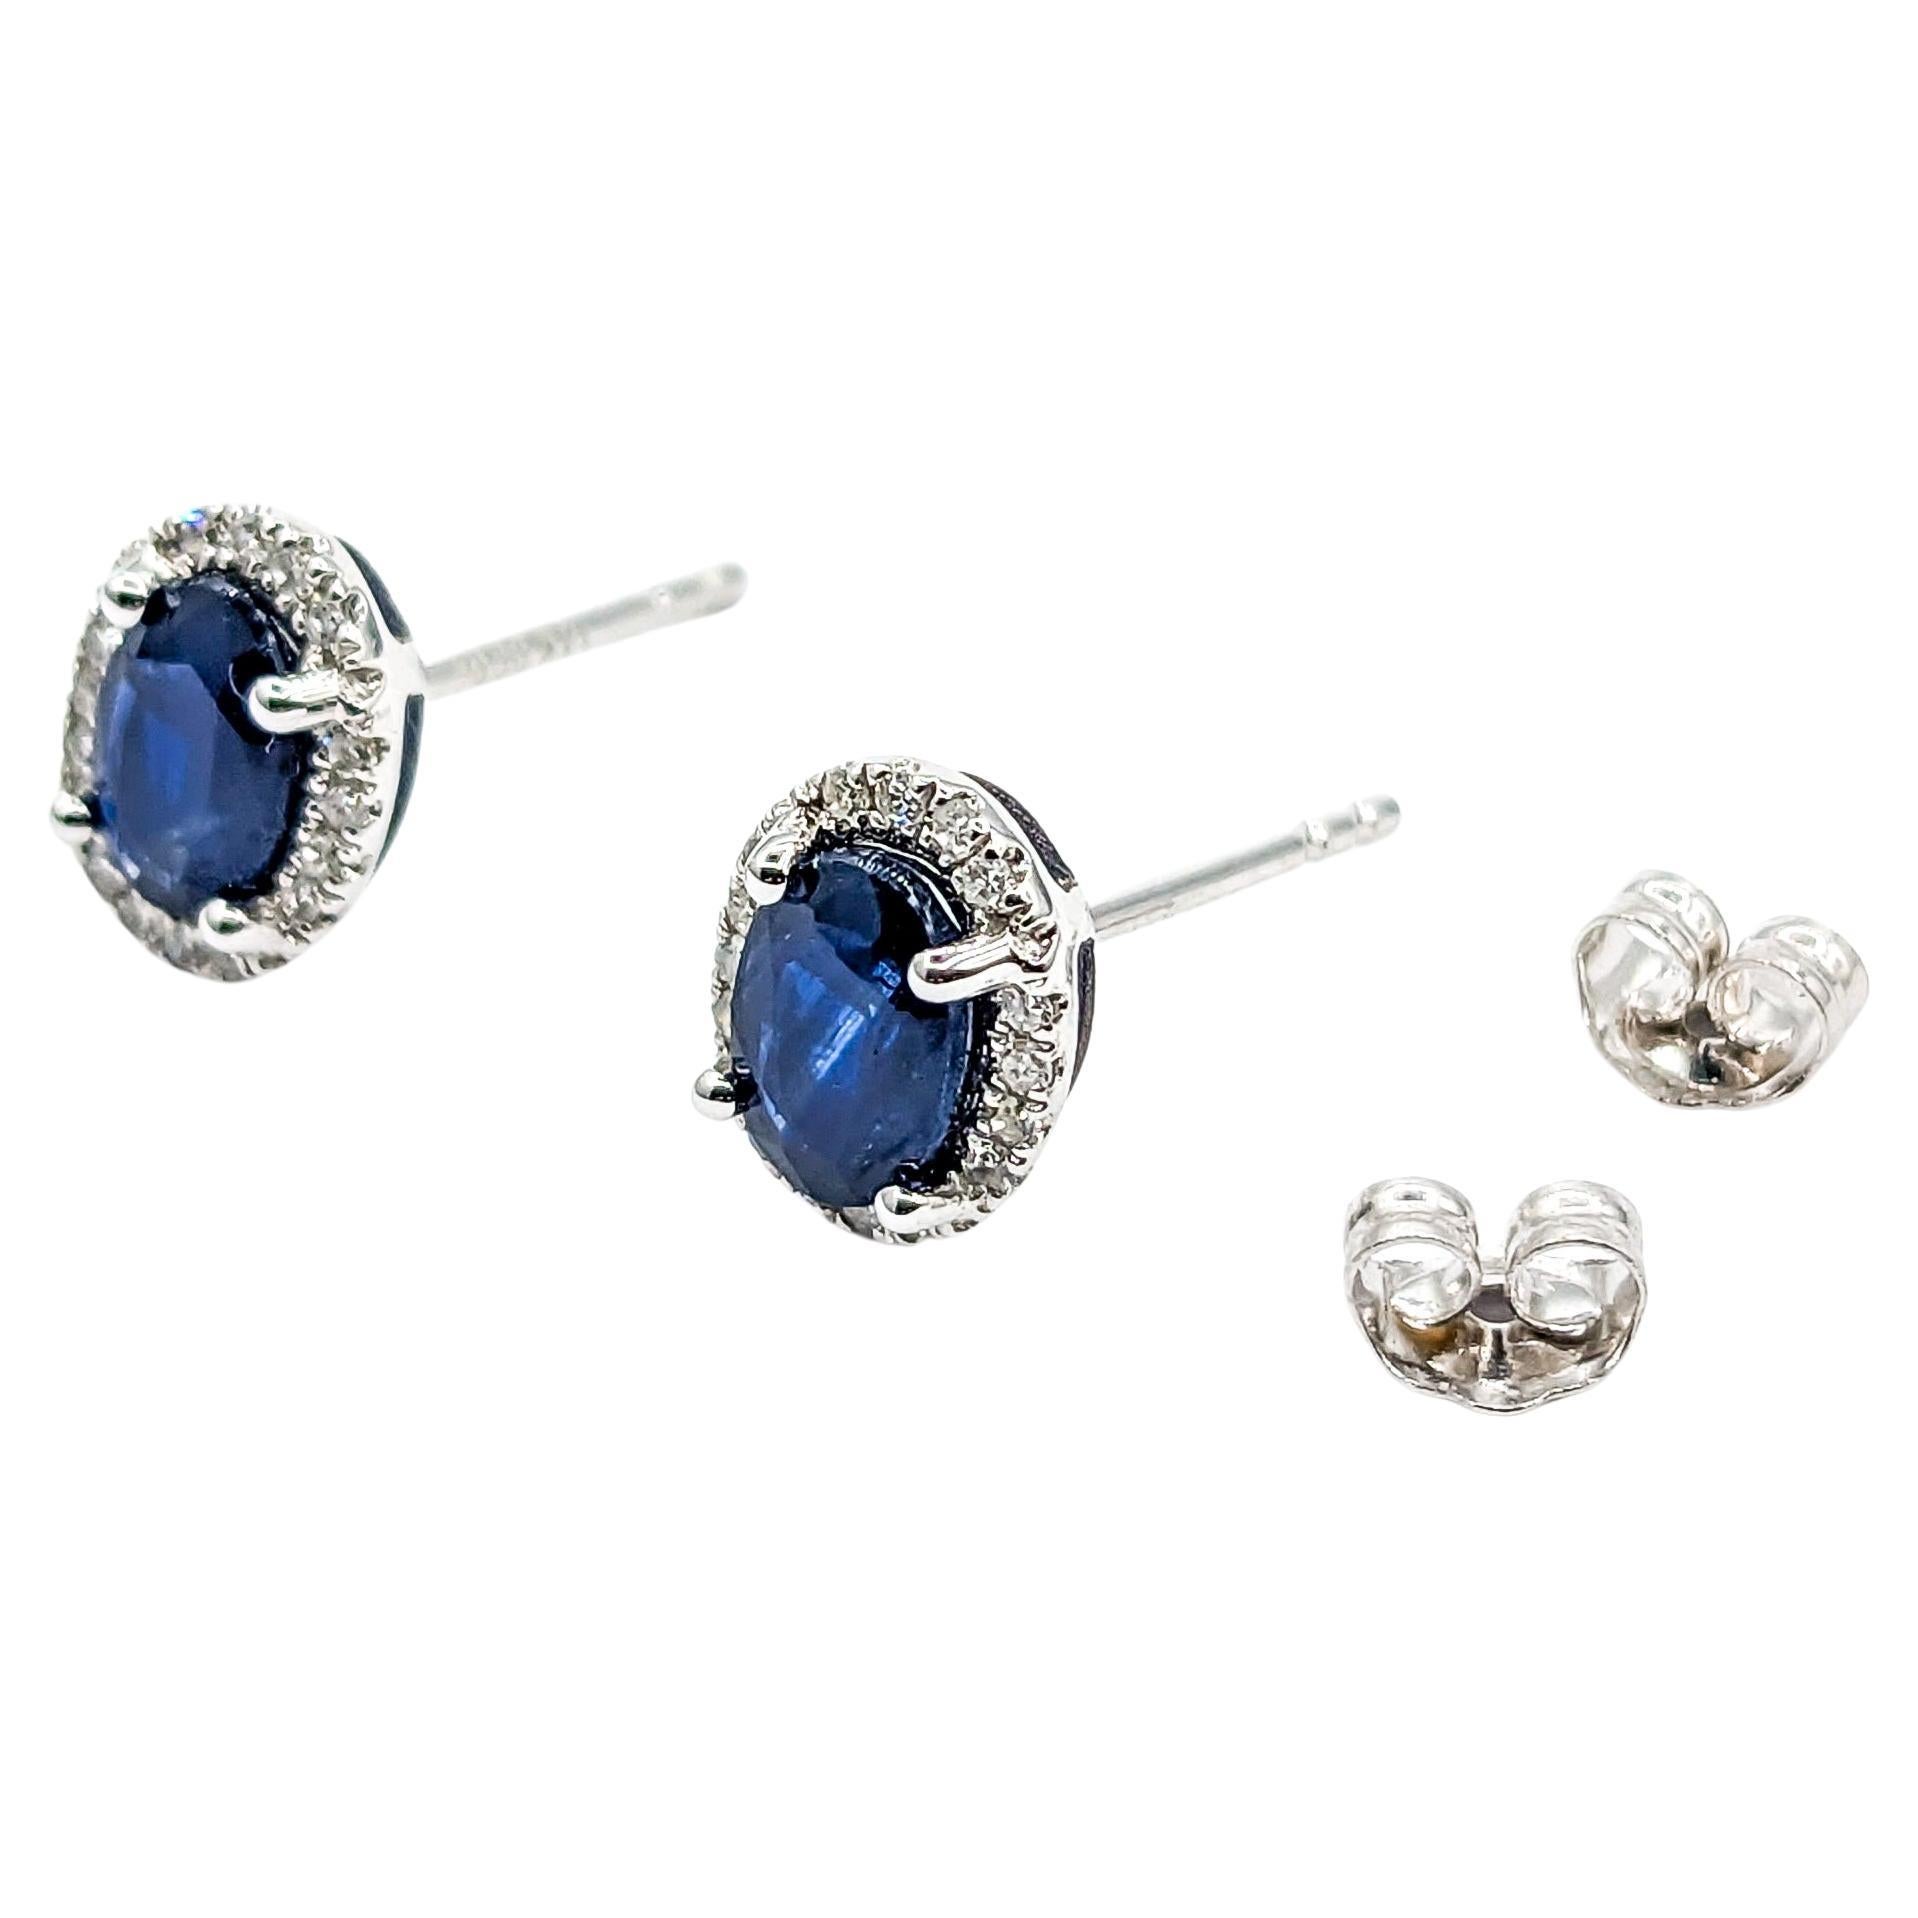 Oval Sapphire & Diamond Stud Earring White Gold

Introducing our exquisite earrings, elegantly crafted in 14 karat white gold, featuring stud 0.10ctw diamonds that exude sparkle. These diamonds, with SI-I clarity and near colorless quality, add a